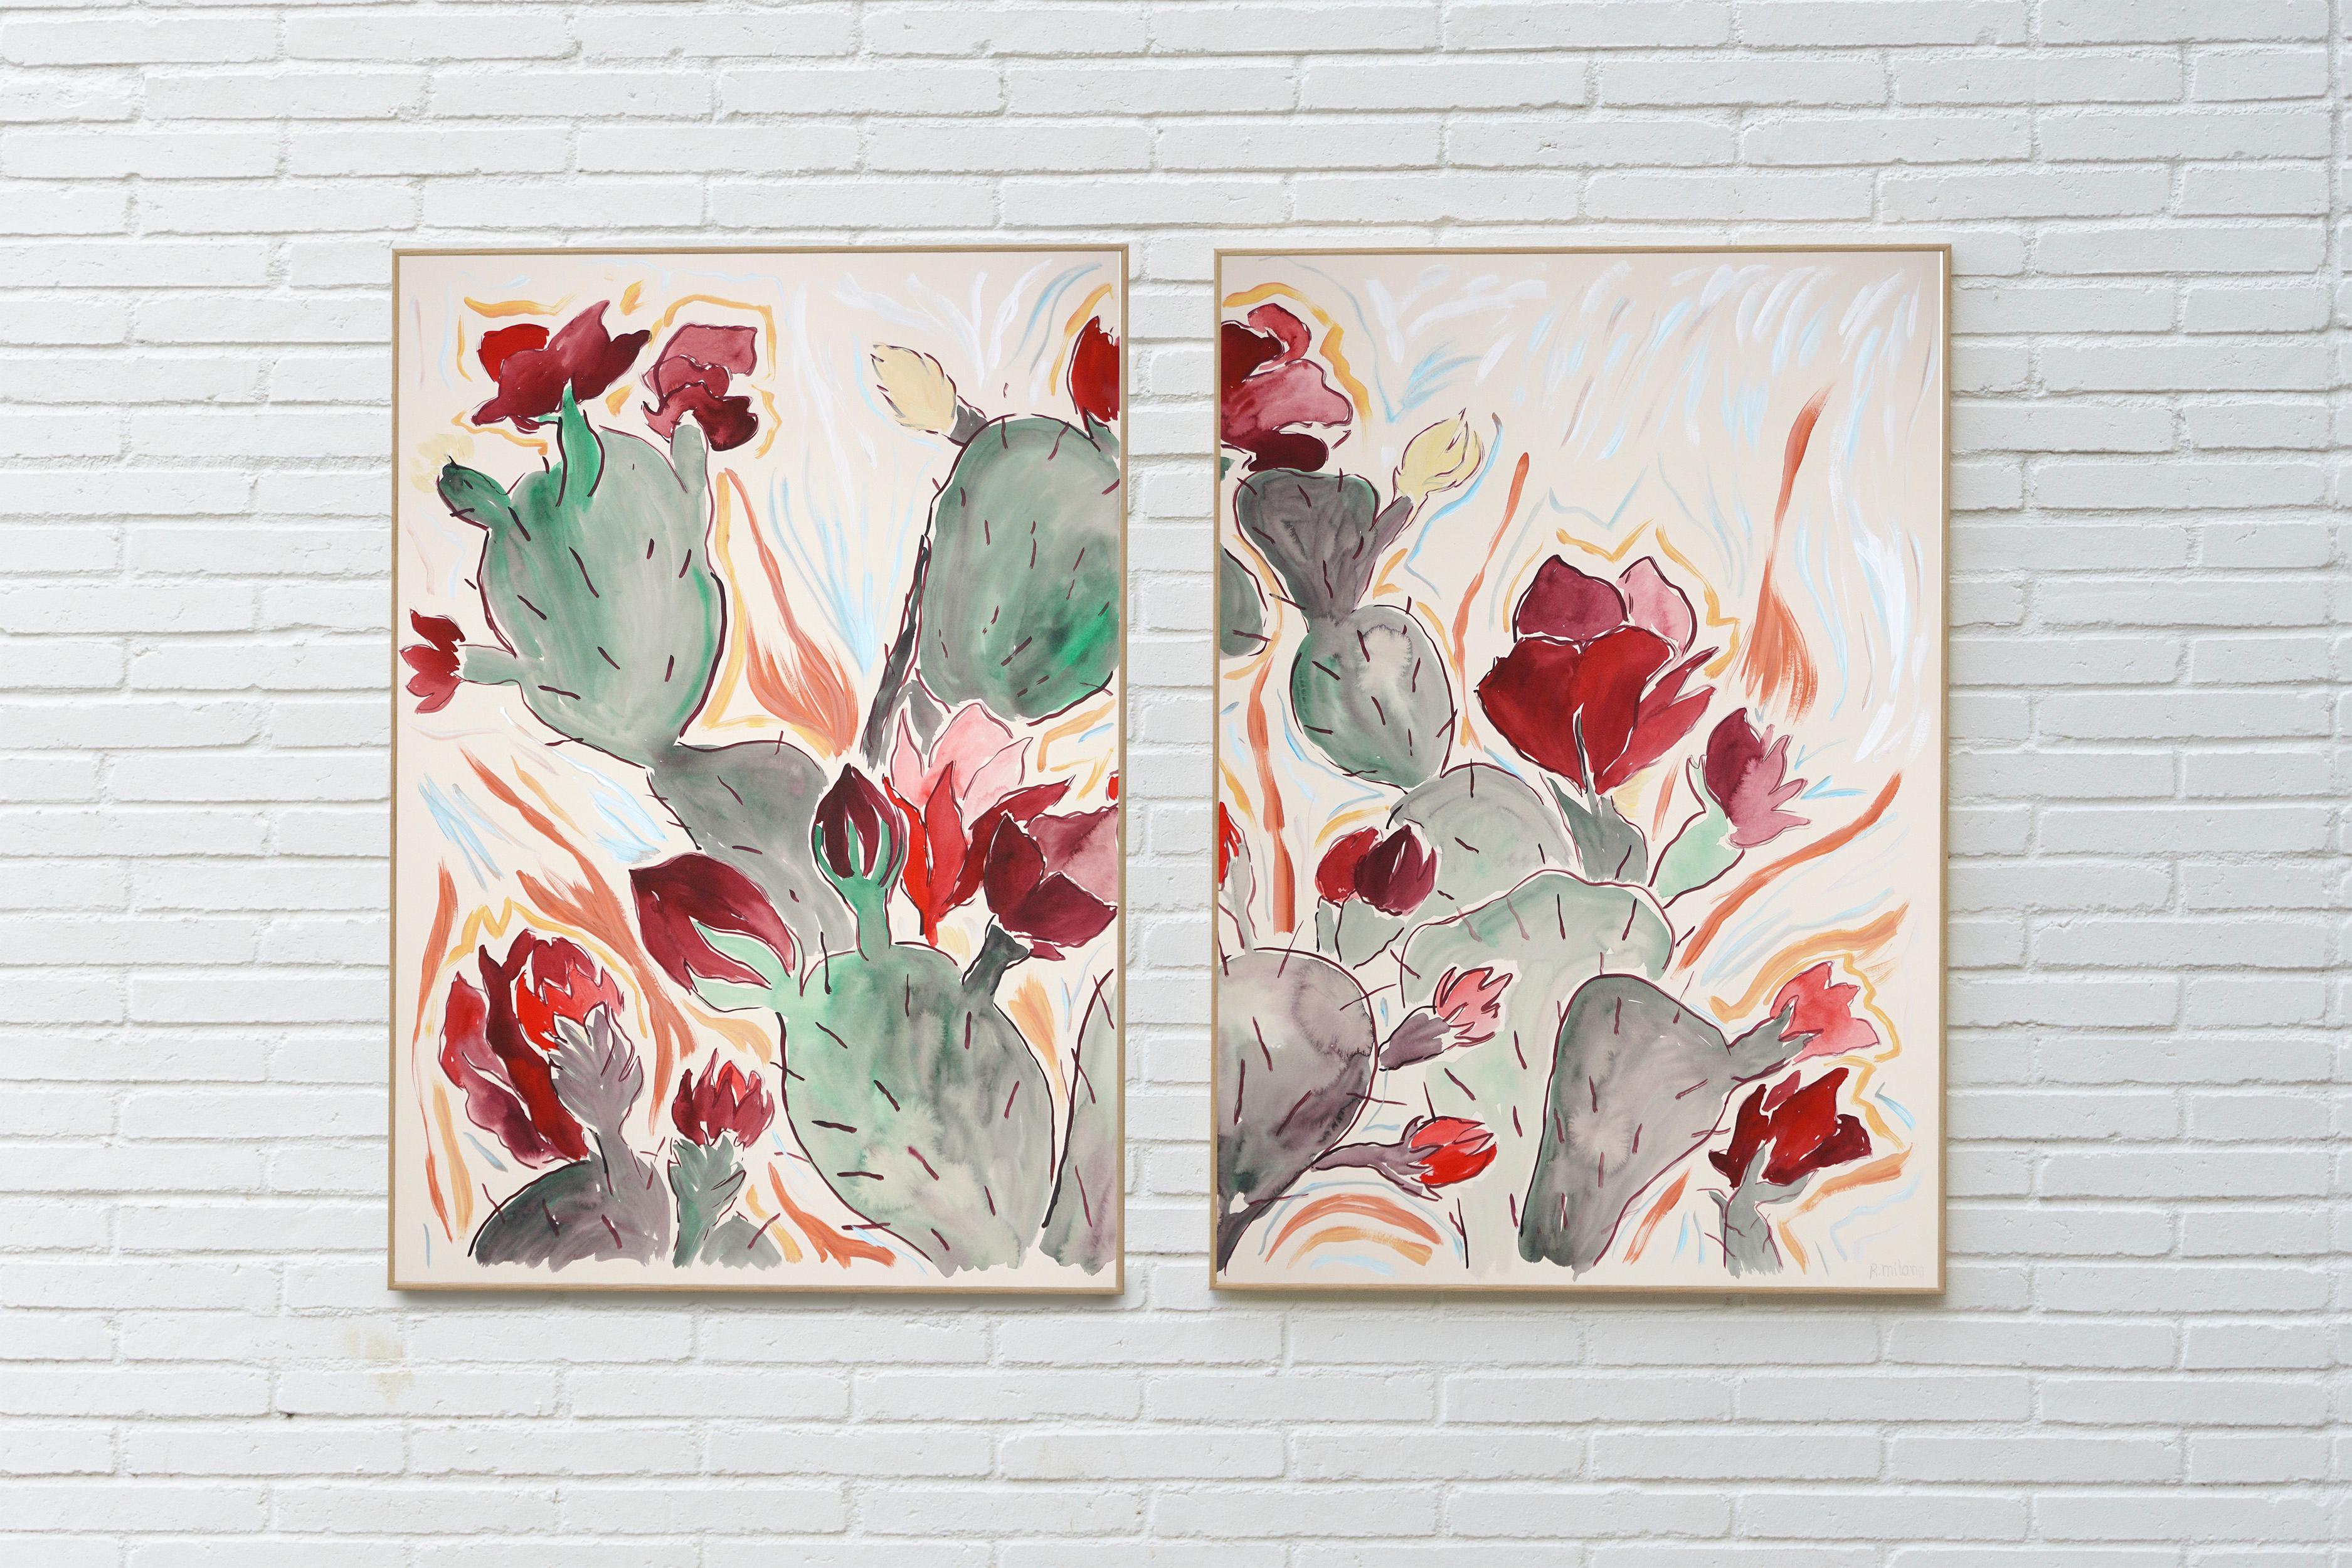 Wild Blooming Cactus Illustration Style Diptych, Red Flowers, Desert Landscape - Painting by Romina Milano